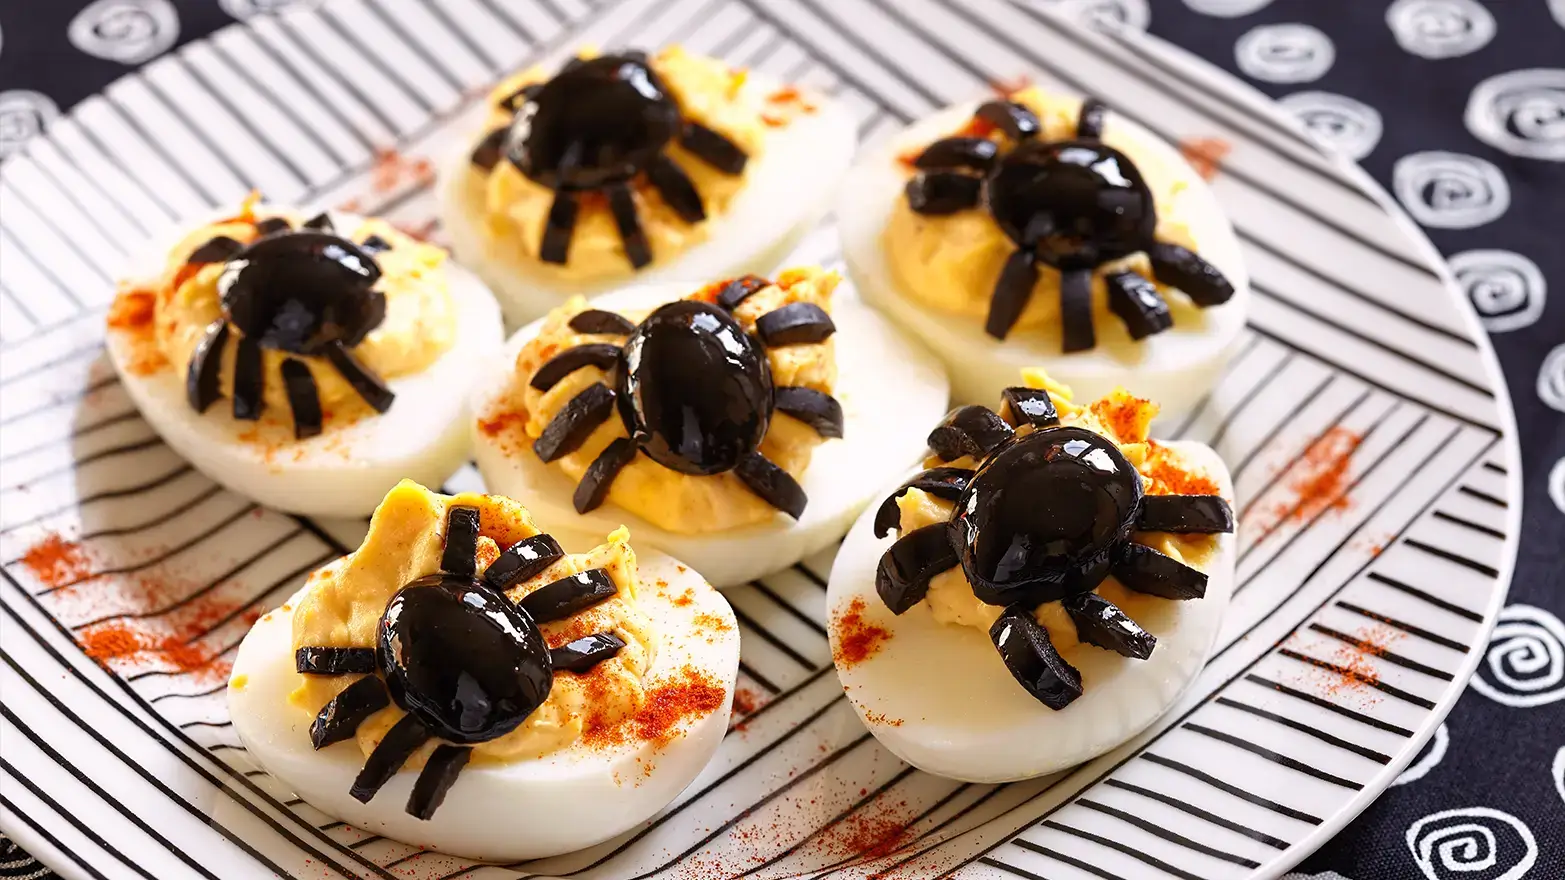 Deviled eggs topped with olive spiders